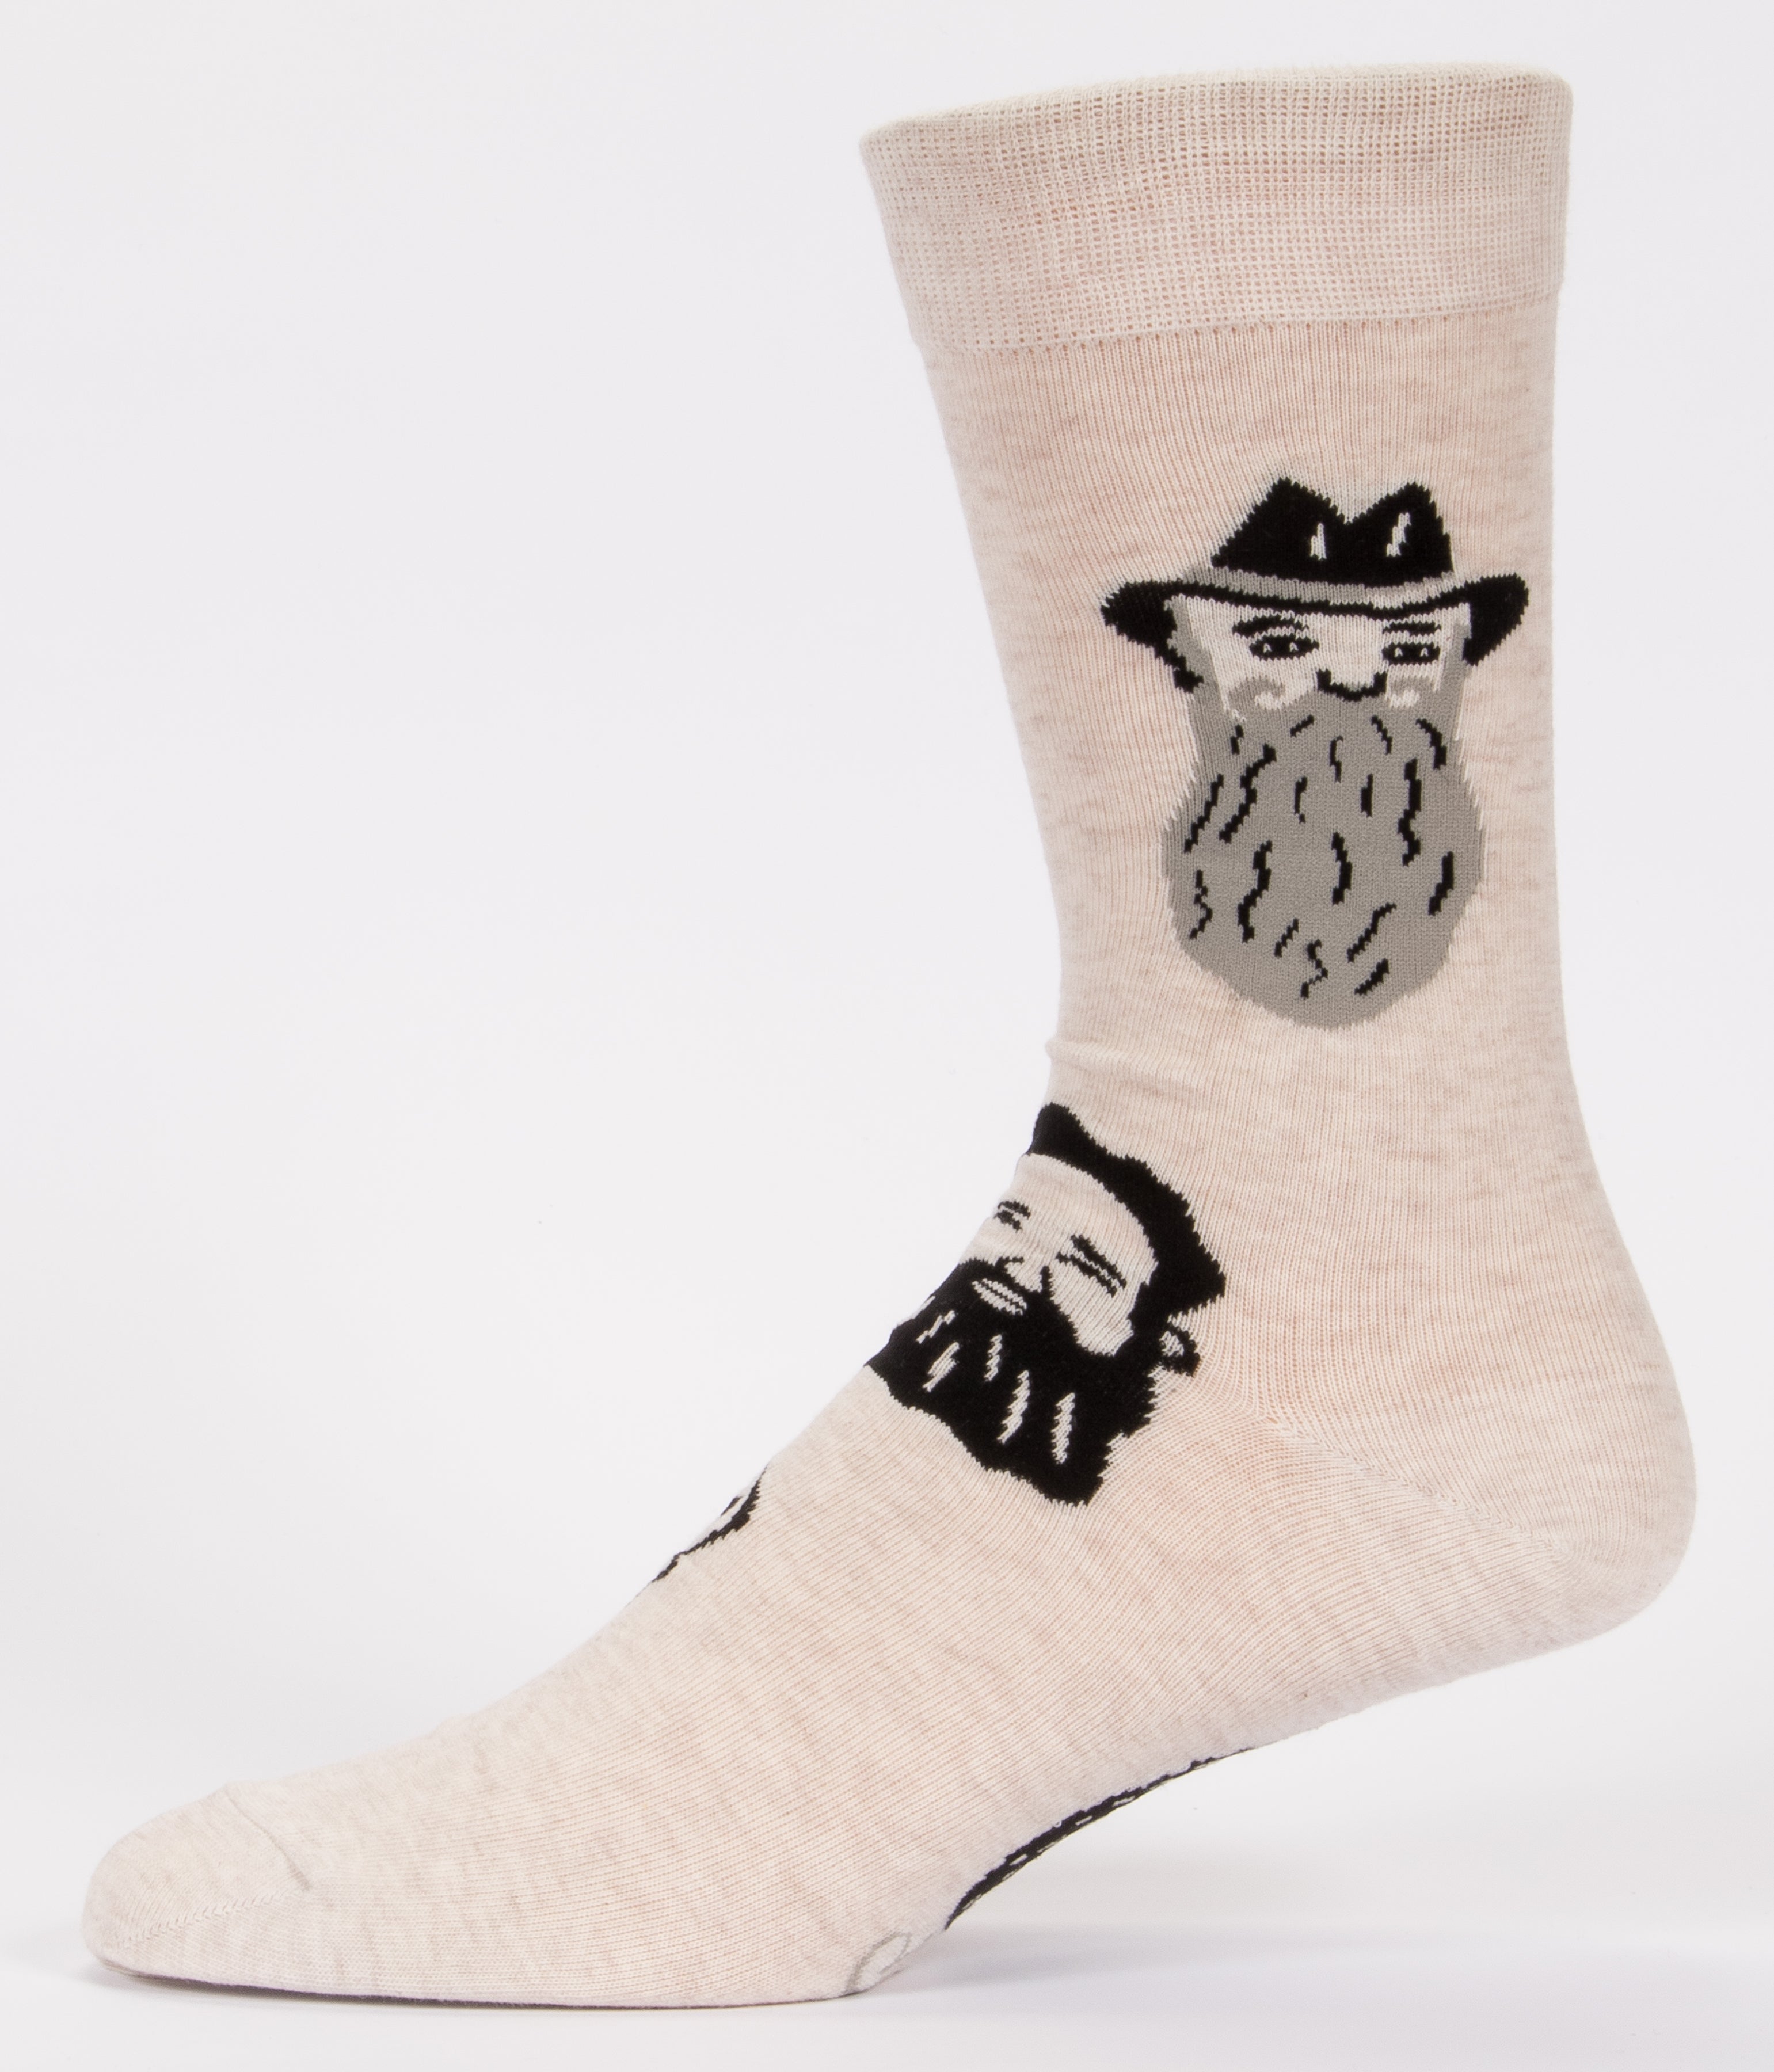 BlueQ Men's Crew Socks: Get A Load of These Whiskers